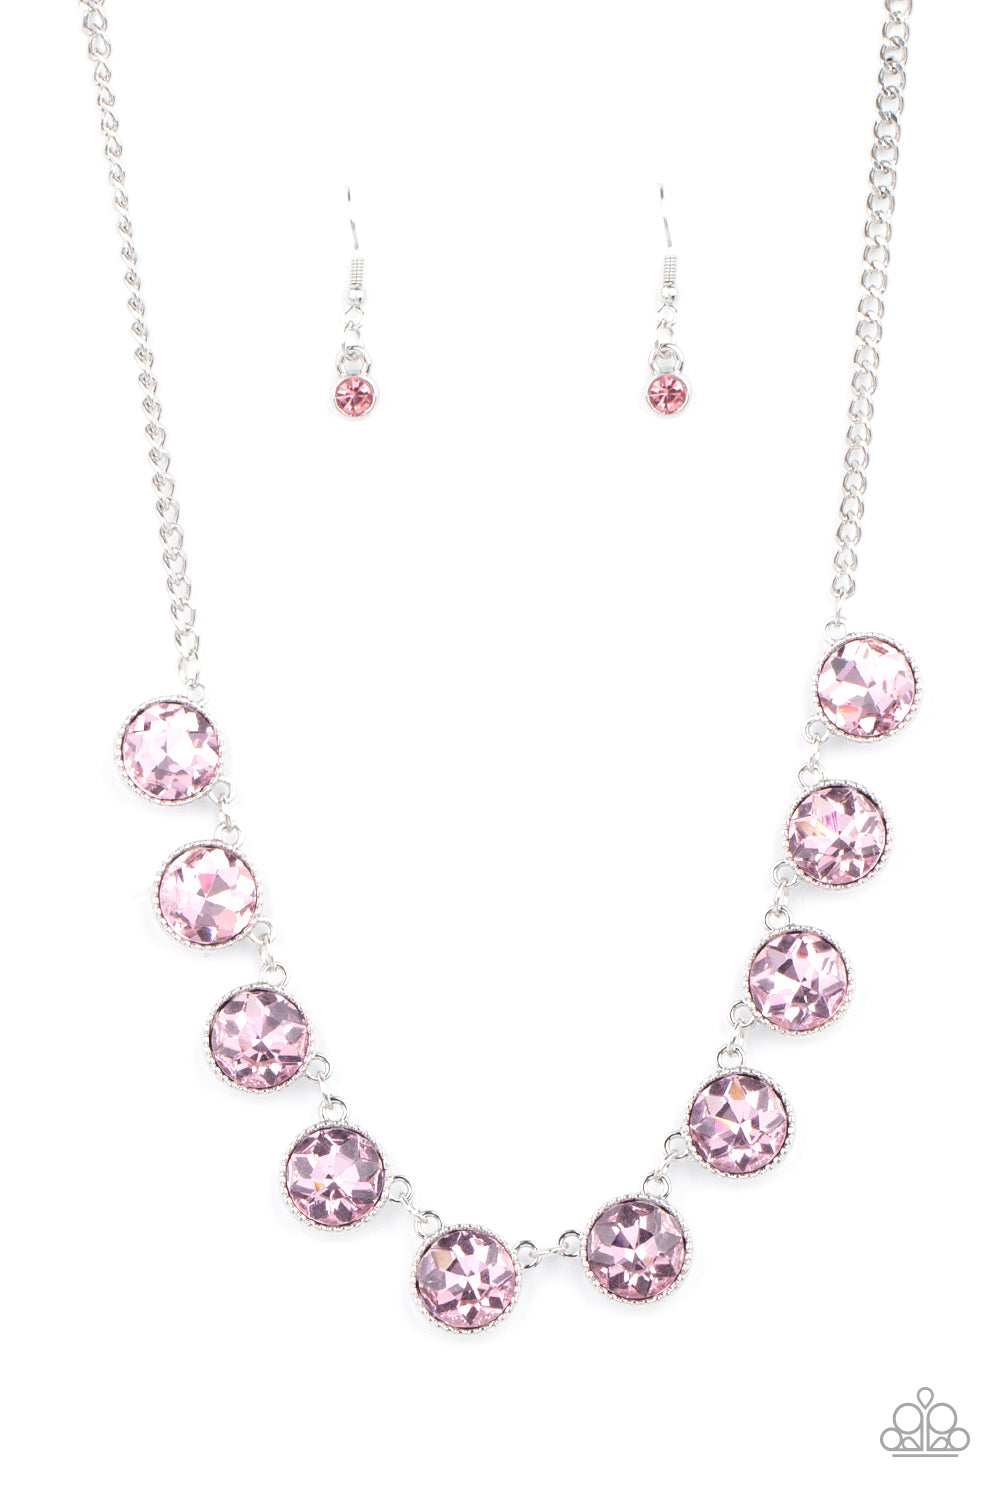 mystical iridescence, a sparkling display of round cut pink gems are encased in delicately textured silver frames